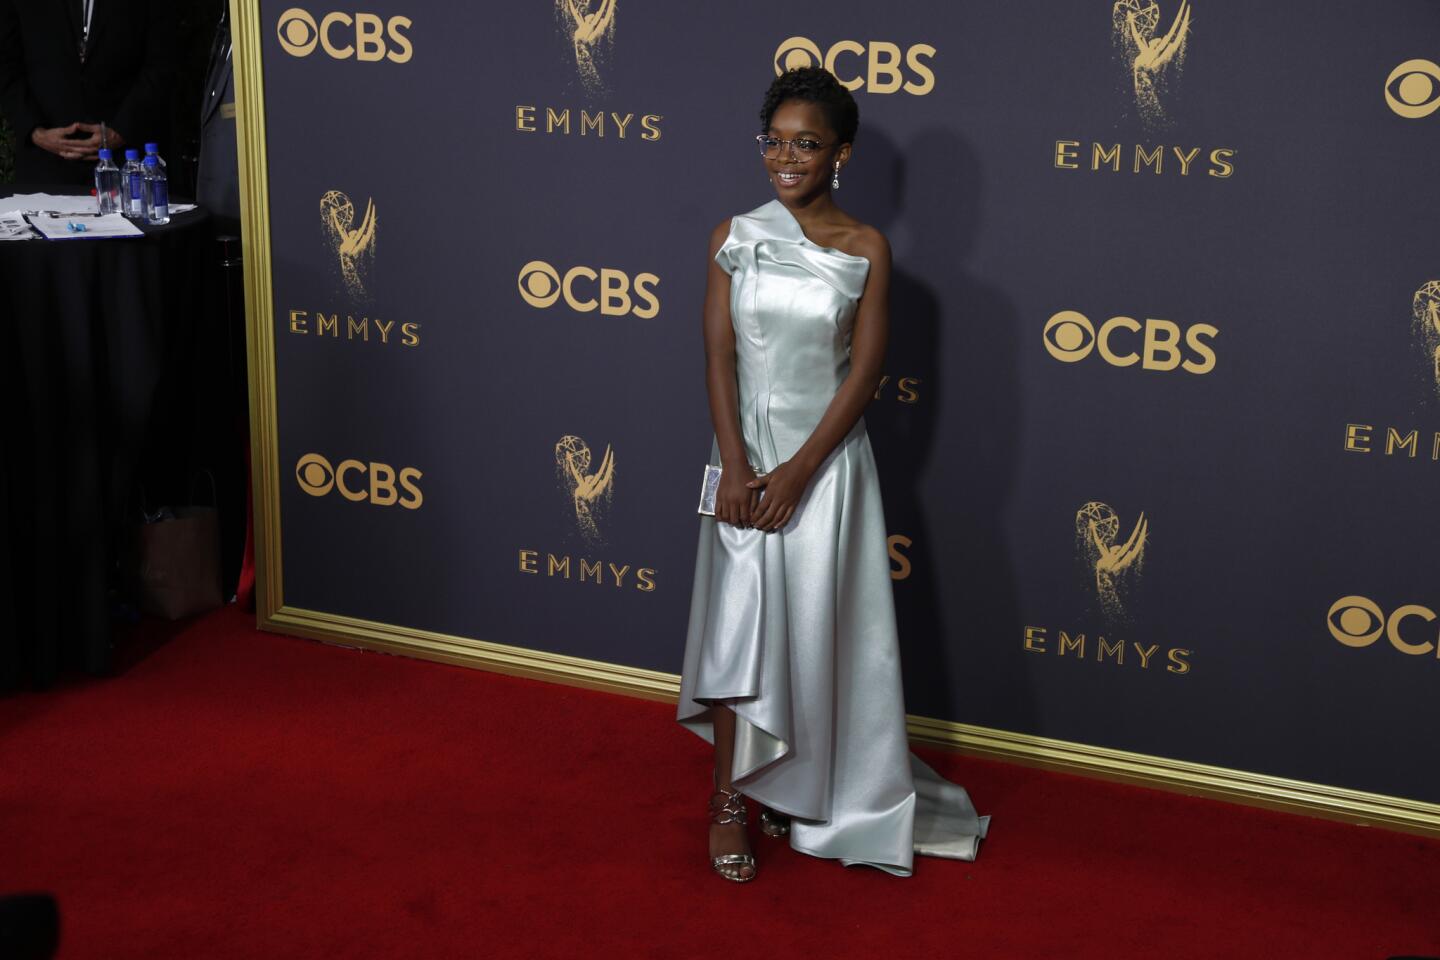 Women Over 50 Beauty Looks at the 2017 Emmy Awards